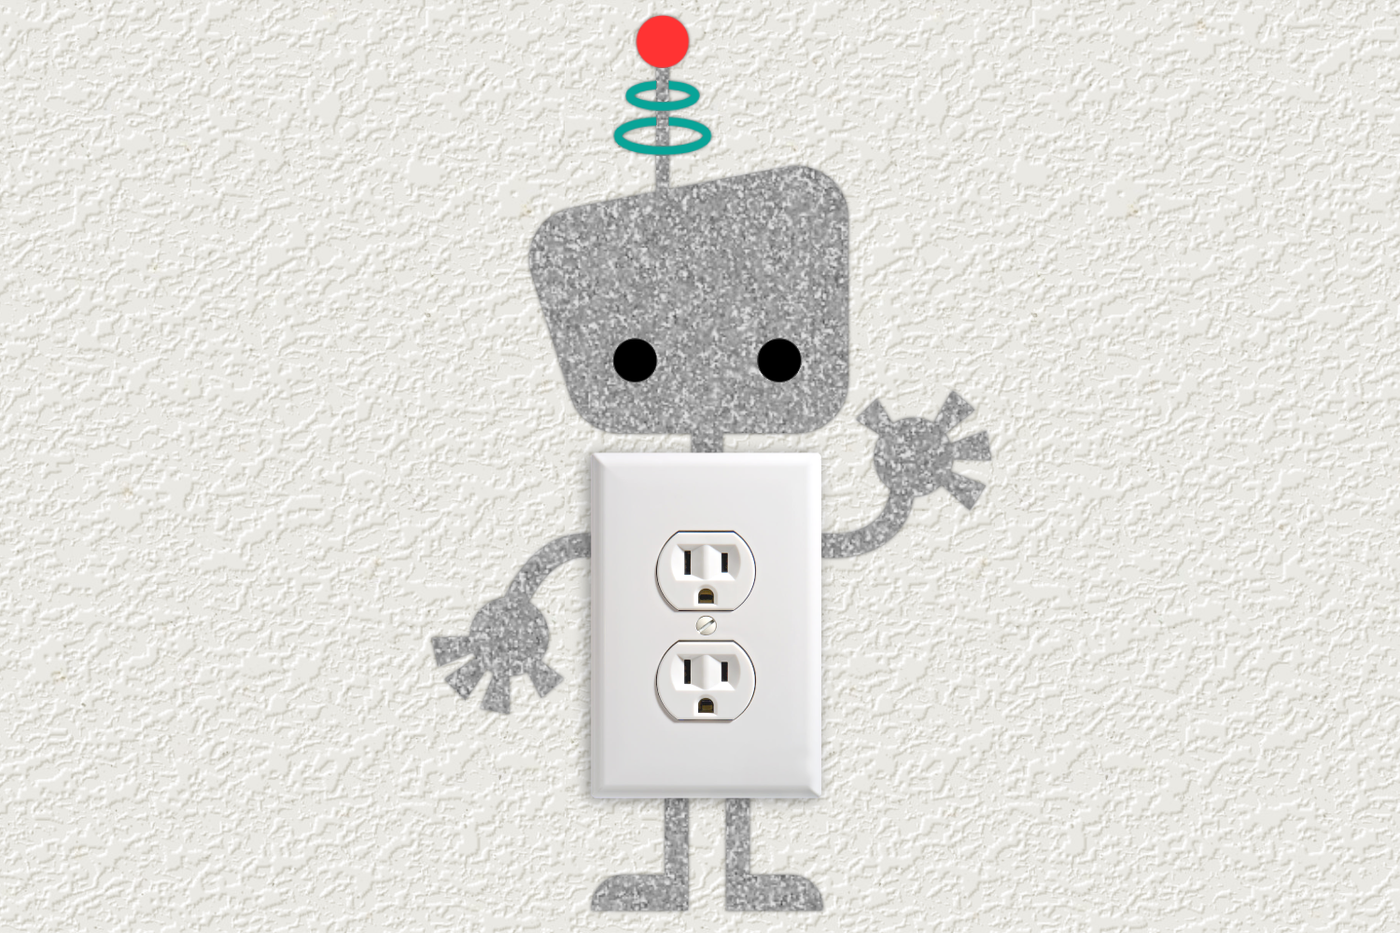 Cute robot outlet or light switch decoration